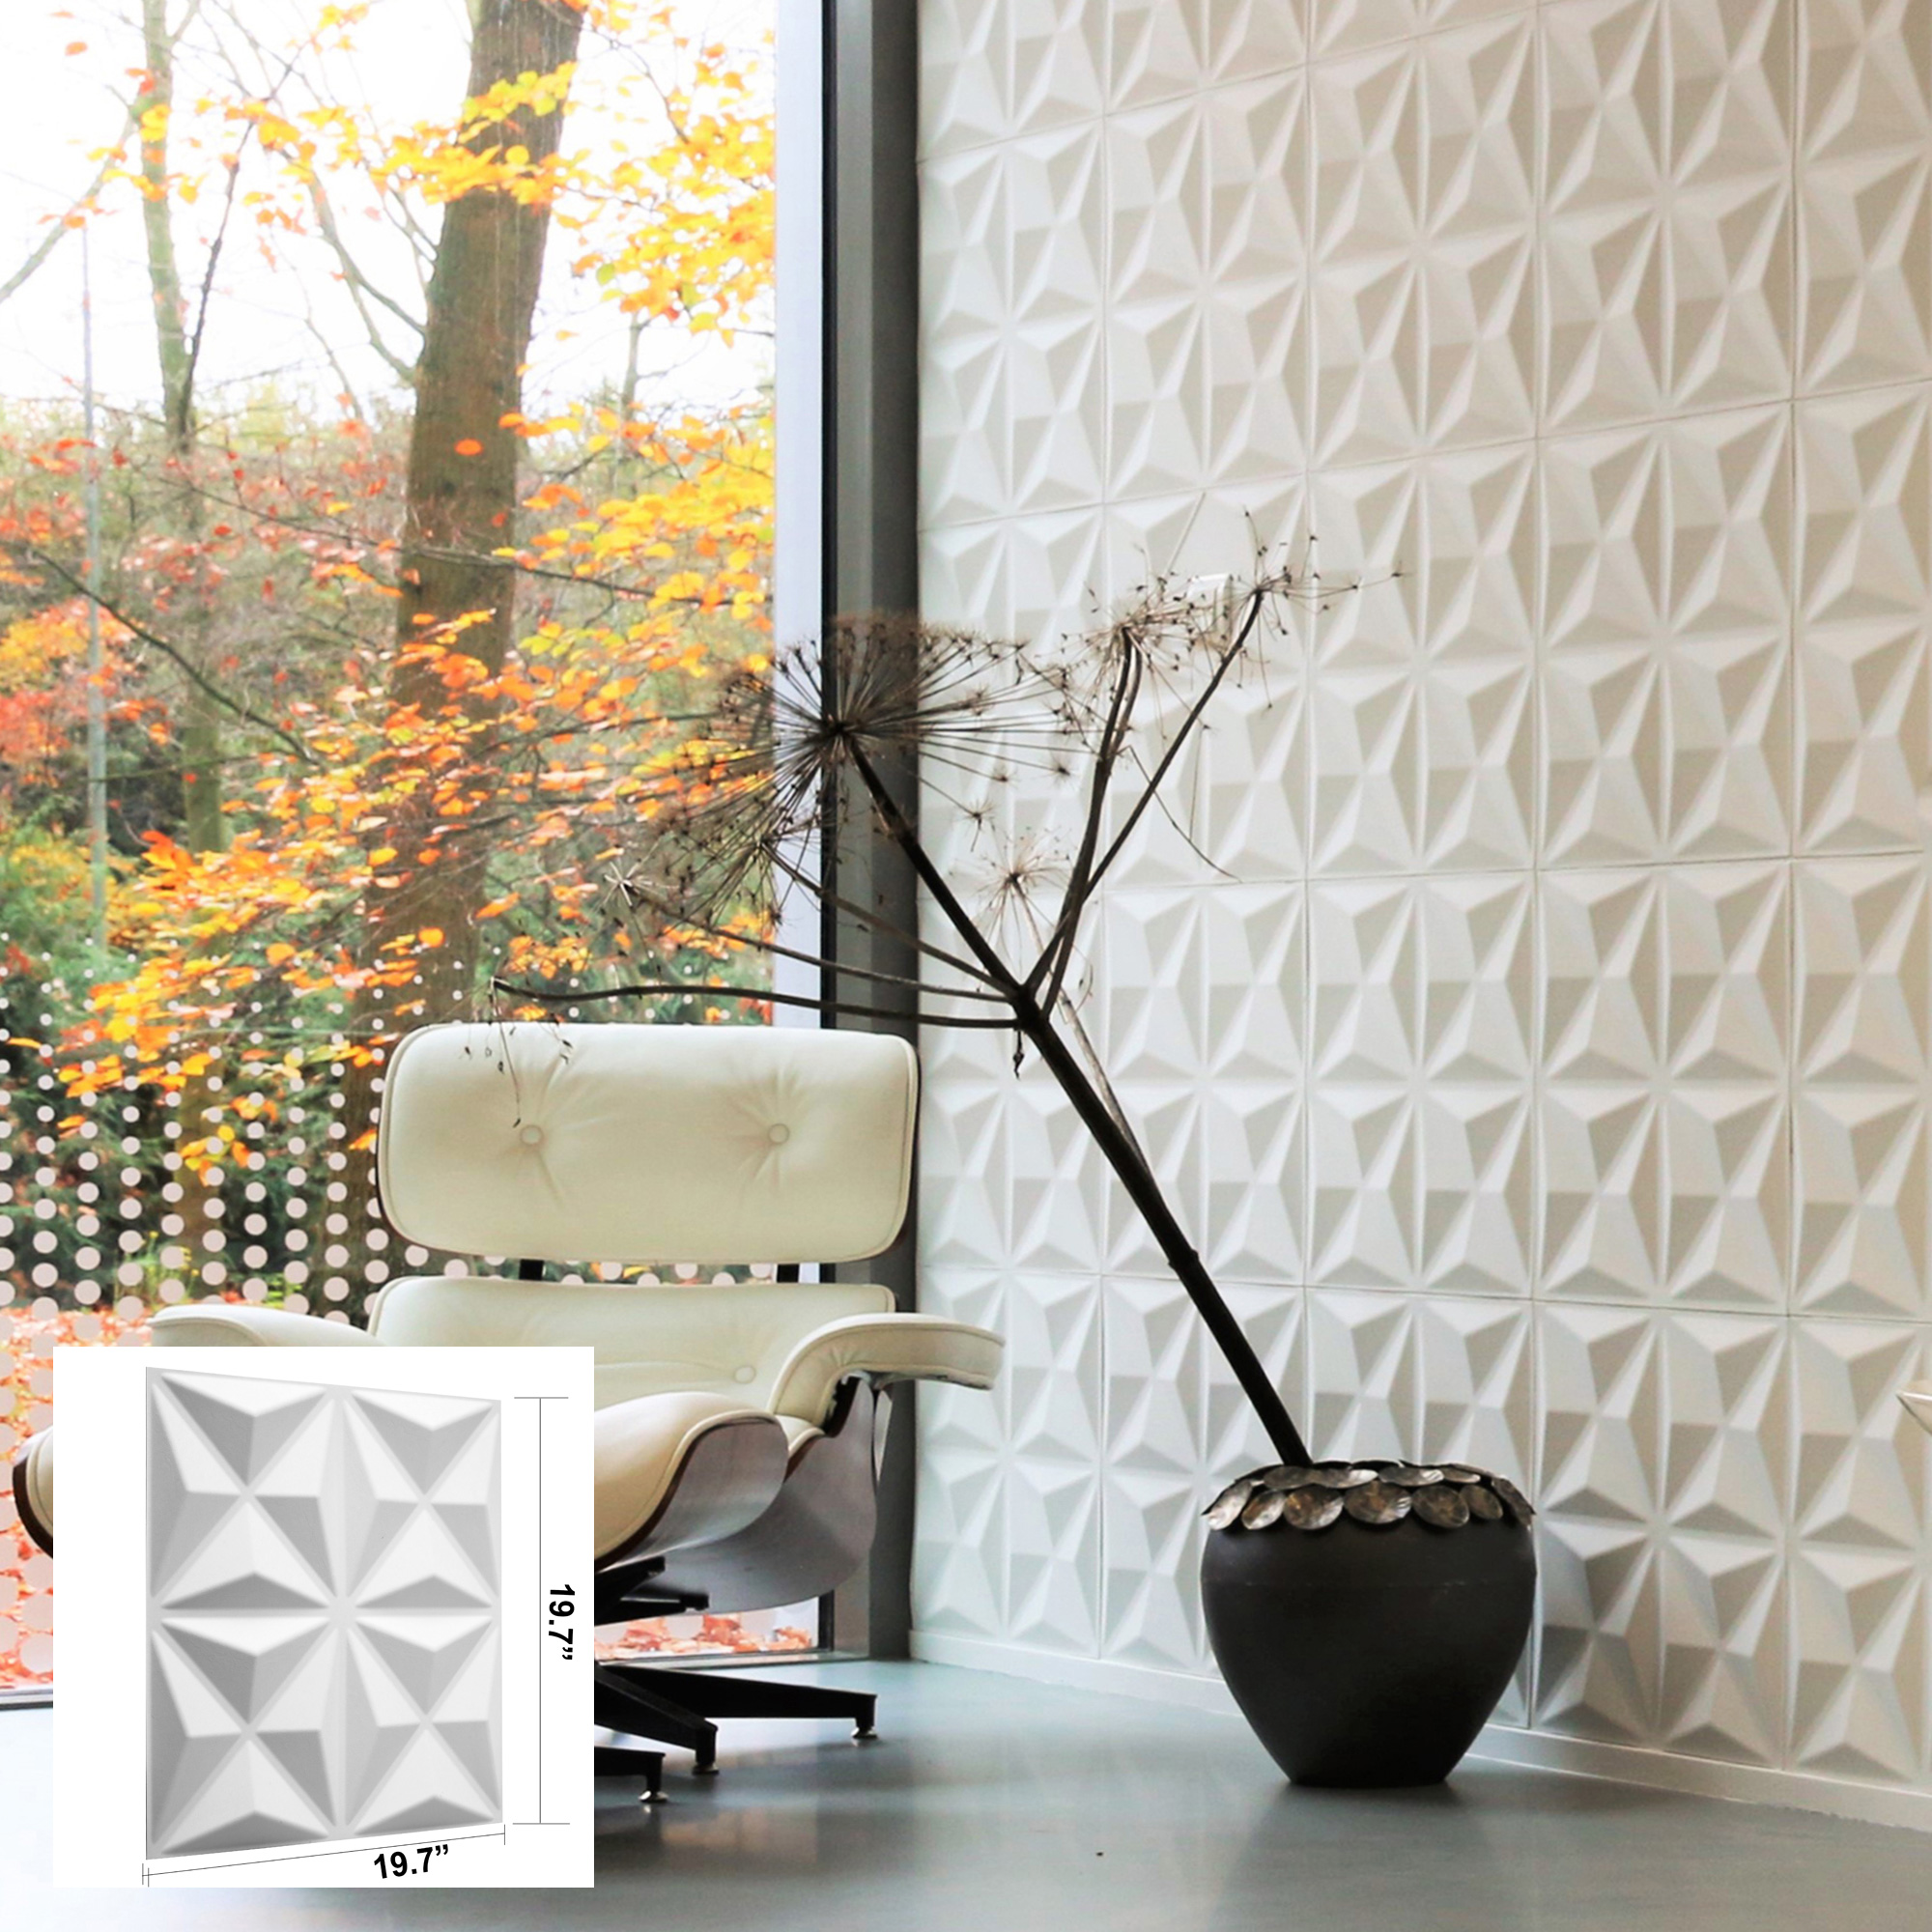 3D Wall Panels Decorative Embossed Wall Tiles (12 Panels/Box) Covers 32  sqft- Size 19.7